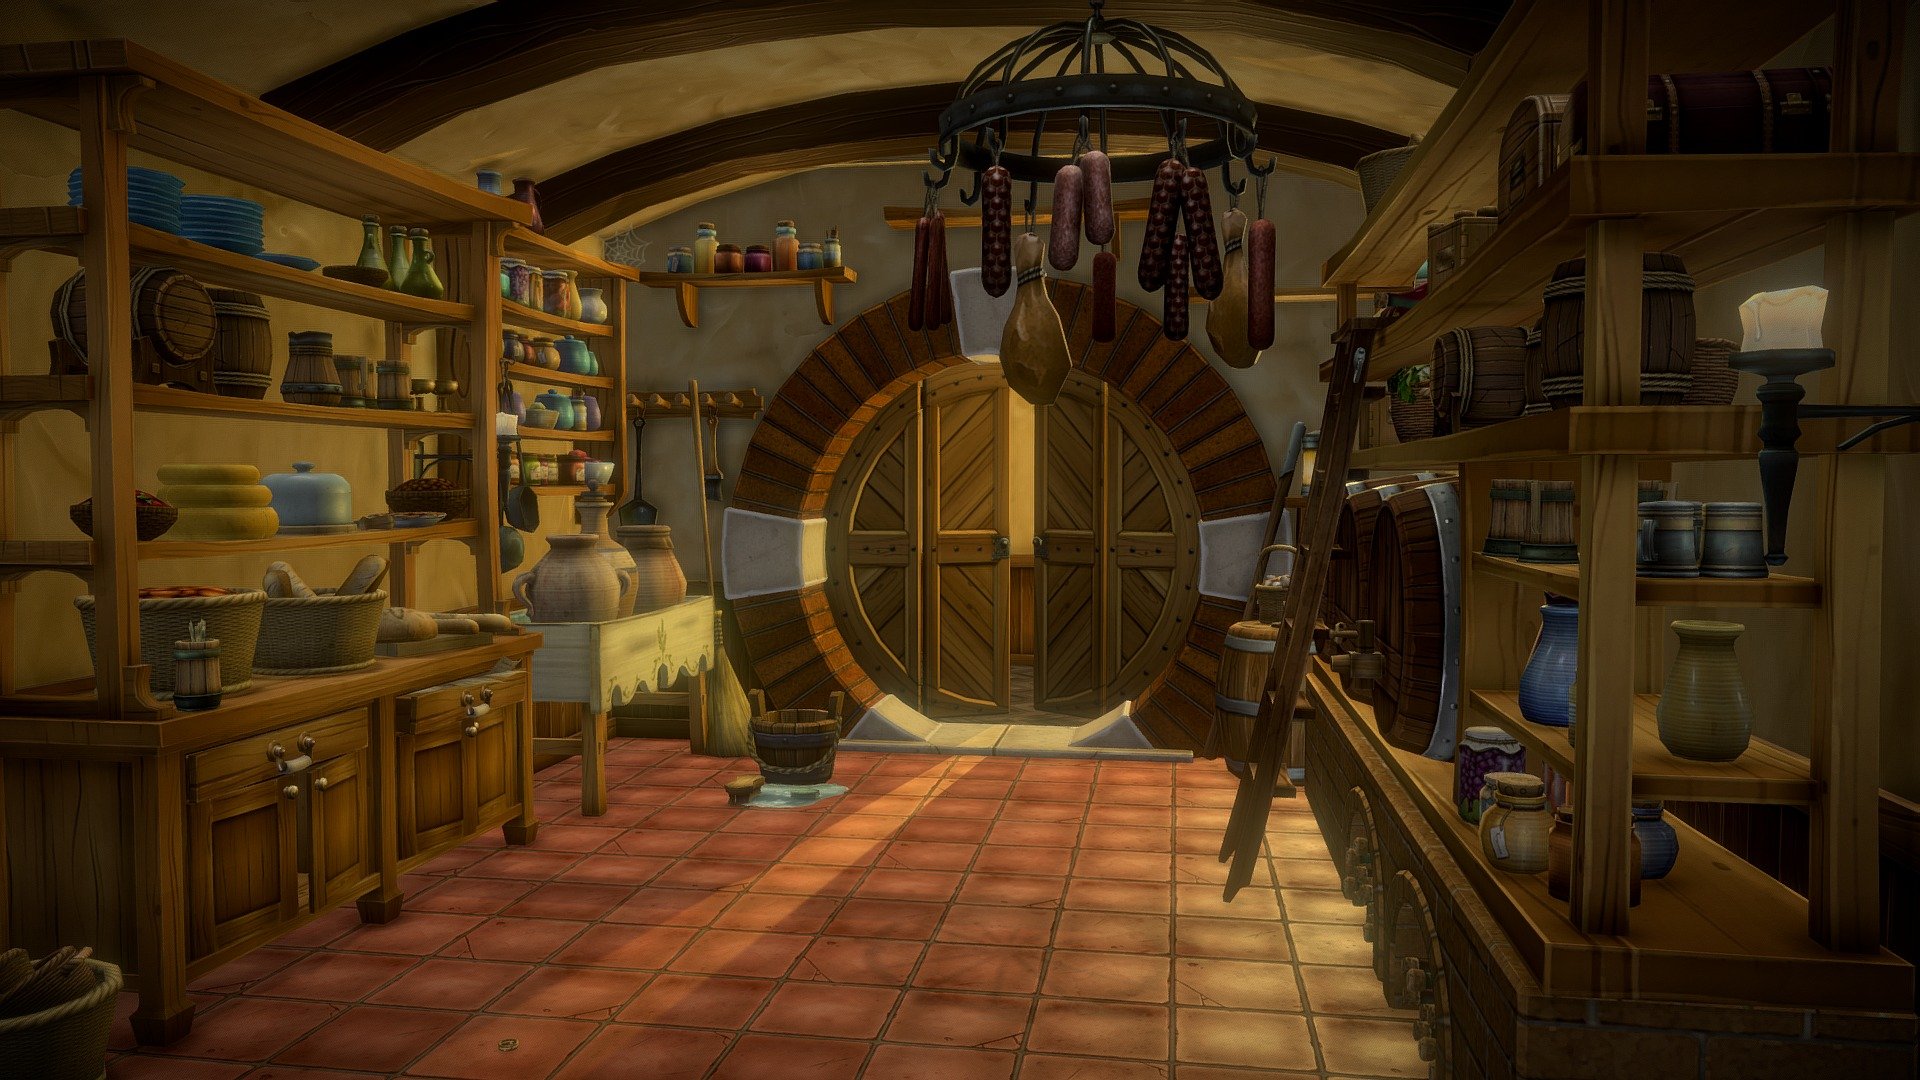 Bilbo's Pantry is inspired by the Bag End Pantry concept created by the amazing John Howe. That concept, along with the Lord of the Rings and Hobbit movies, motivated me to create this scene. I wanted to get back to some stylized, hand painted textures and created this scene with that goal in mind. The pantry scene is low poly and utilizes diffuse and specular maps only.
Tolkien's works have been a big part of my life and I really enjoyed working on this piece. I hope to expand on it in the future and build more of Bag End. 
* You can also purchase this asset on my new Whiz-Bang Digital Workshop Unity Store.
* And if you would like to see more of my work, please head over to my site (http://whizbangdw.com/) Thanks! - Bilbo's Bag End Pantry - 3D model by WhizBangDW 3d model